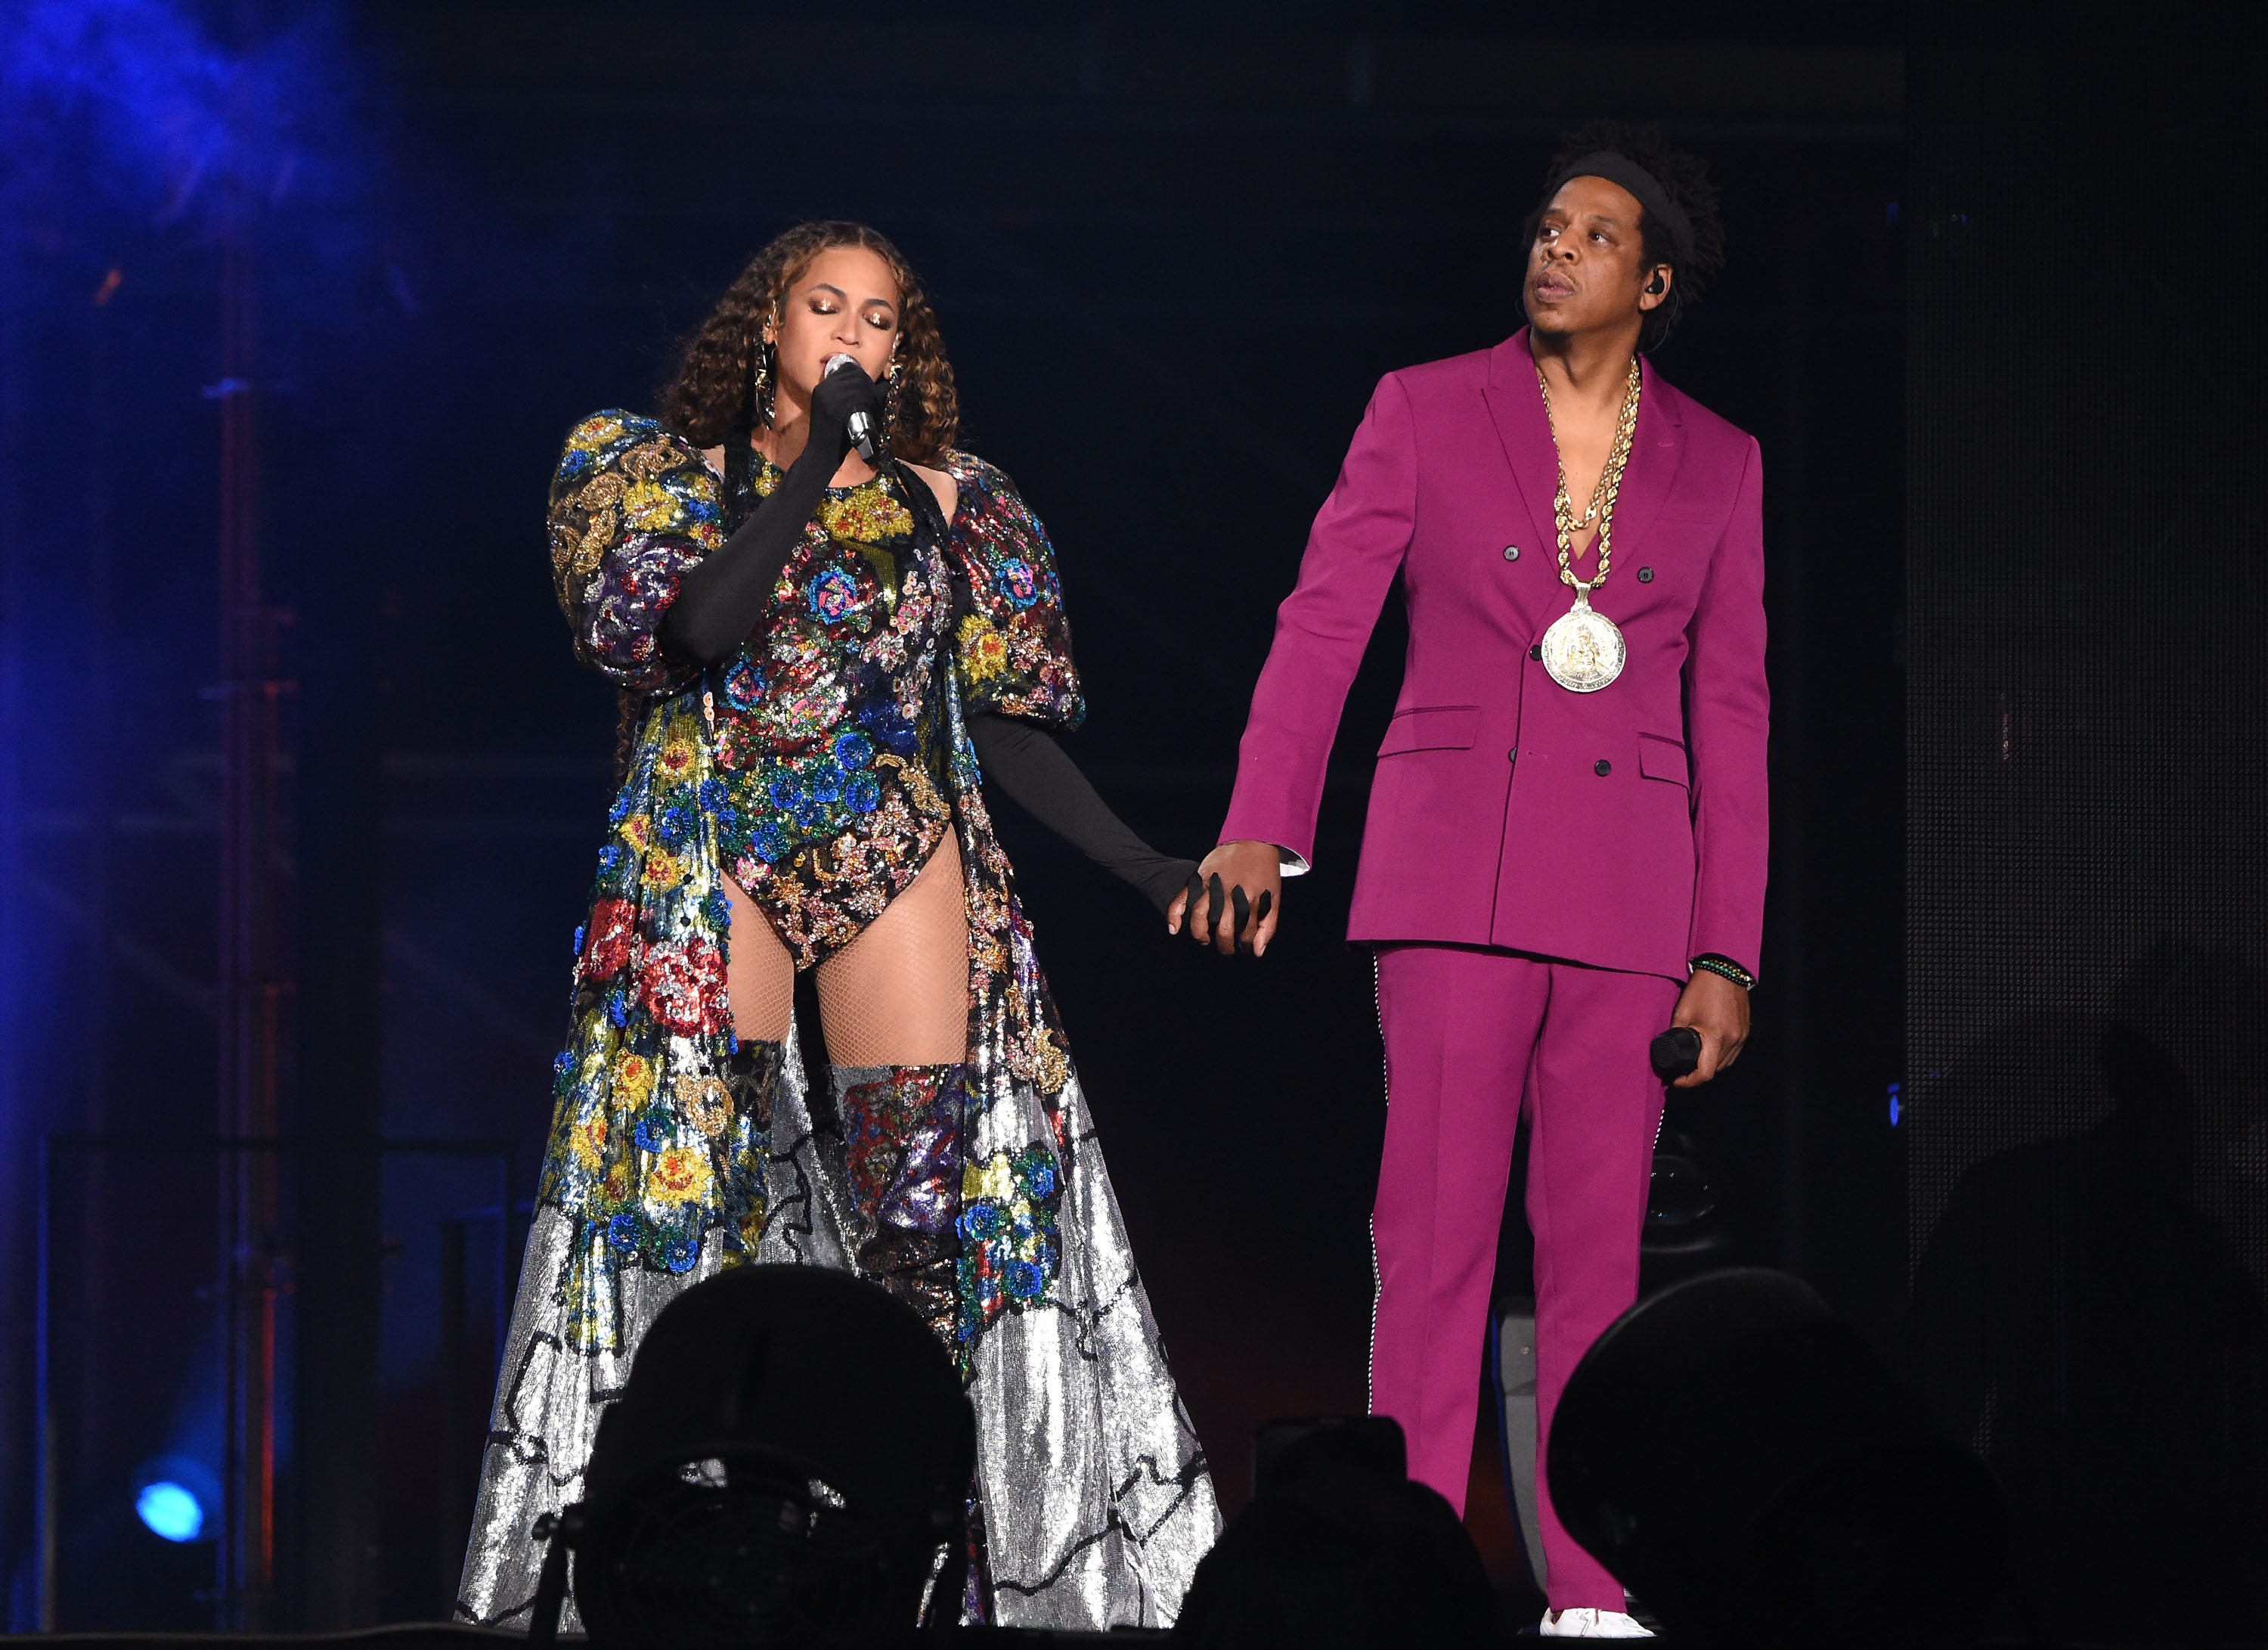 Beyoncé and Jay-Z onstage